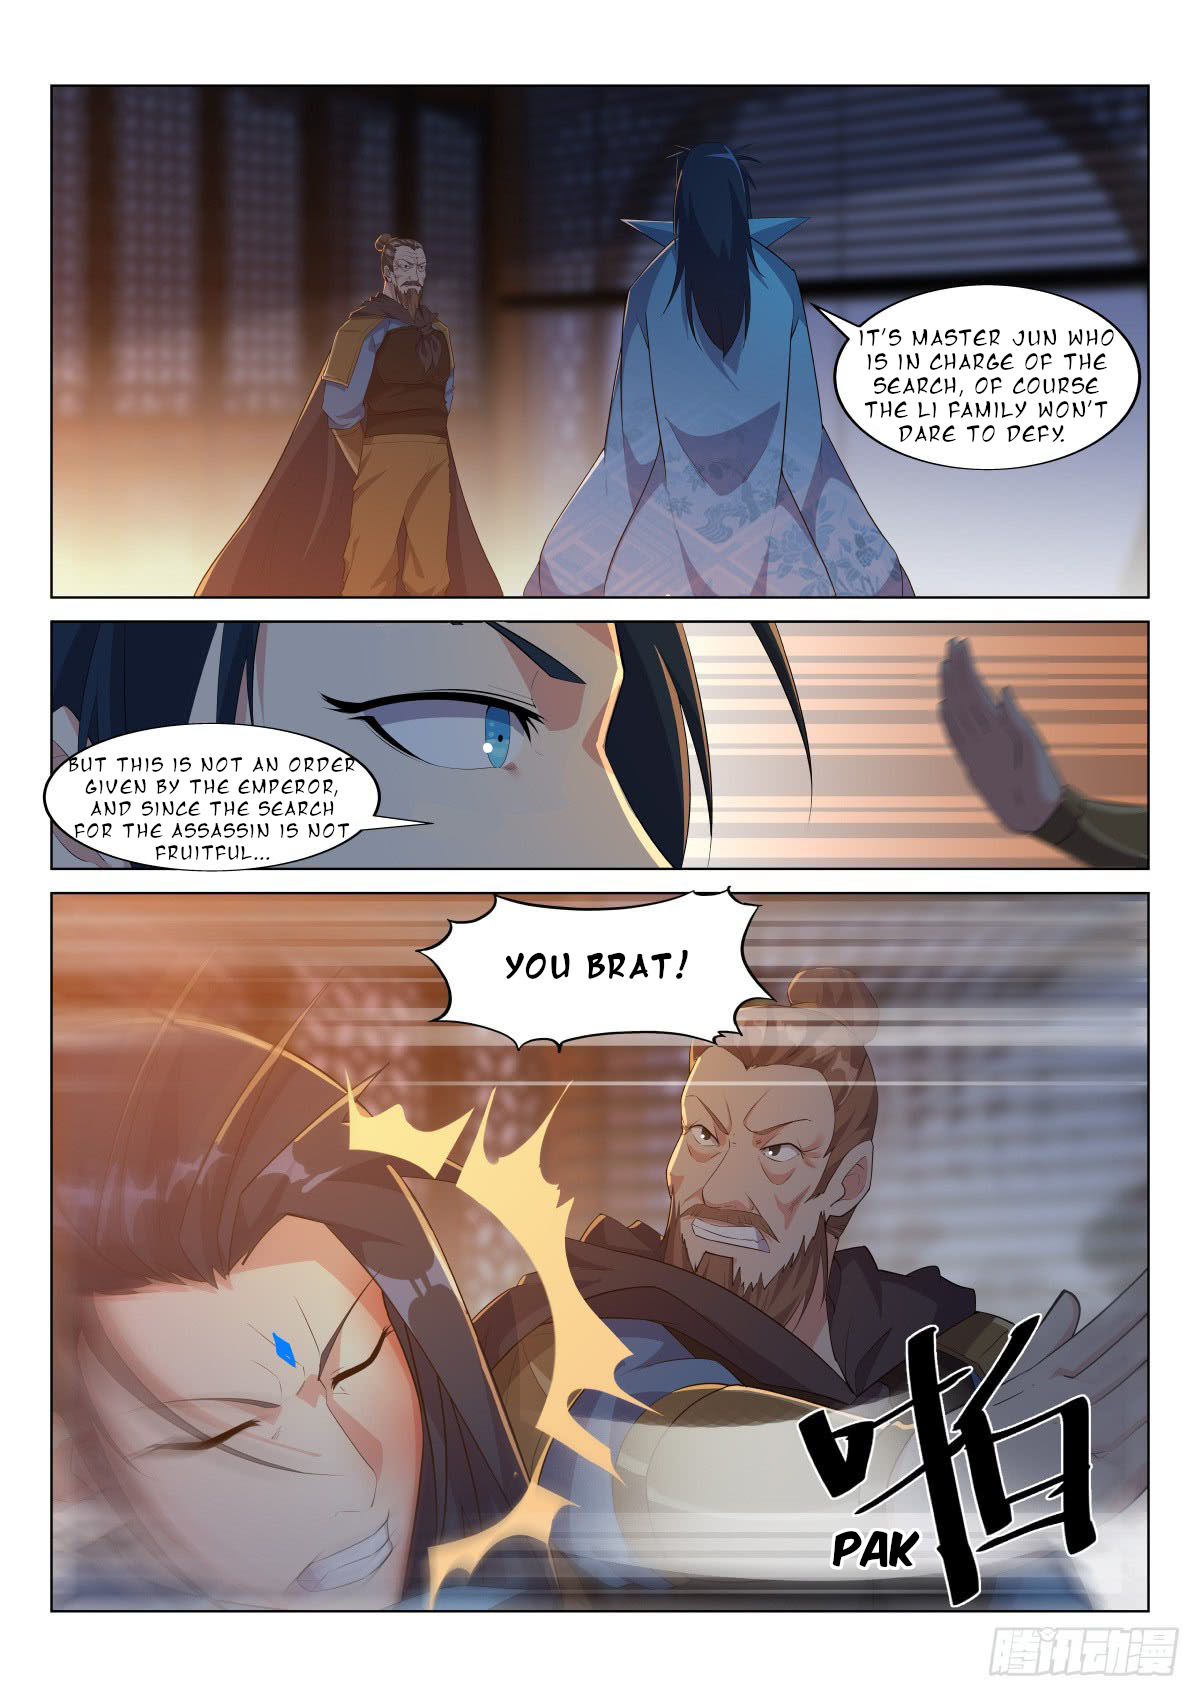 Otherworldly Evil Monarch - Page 2